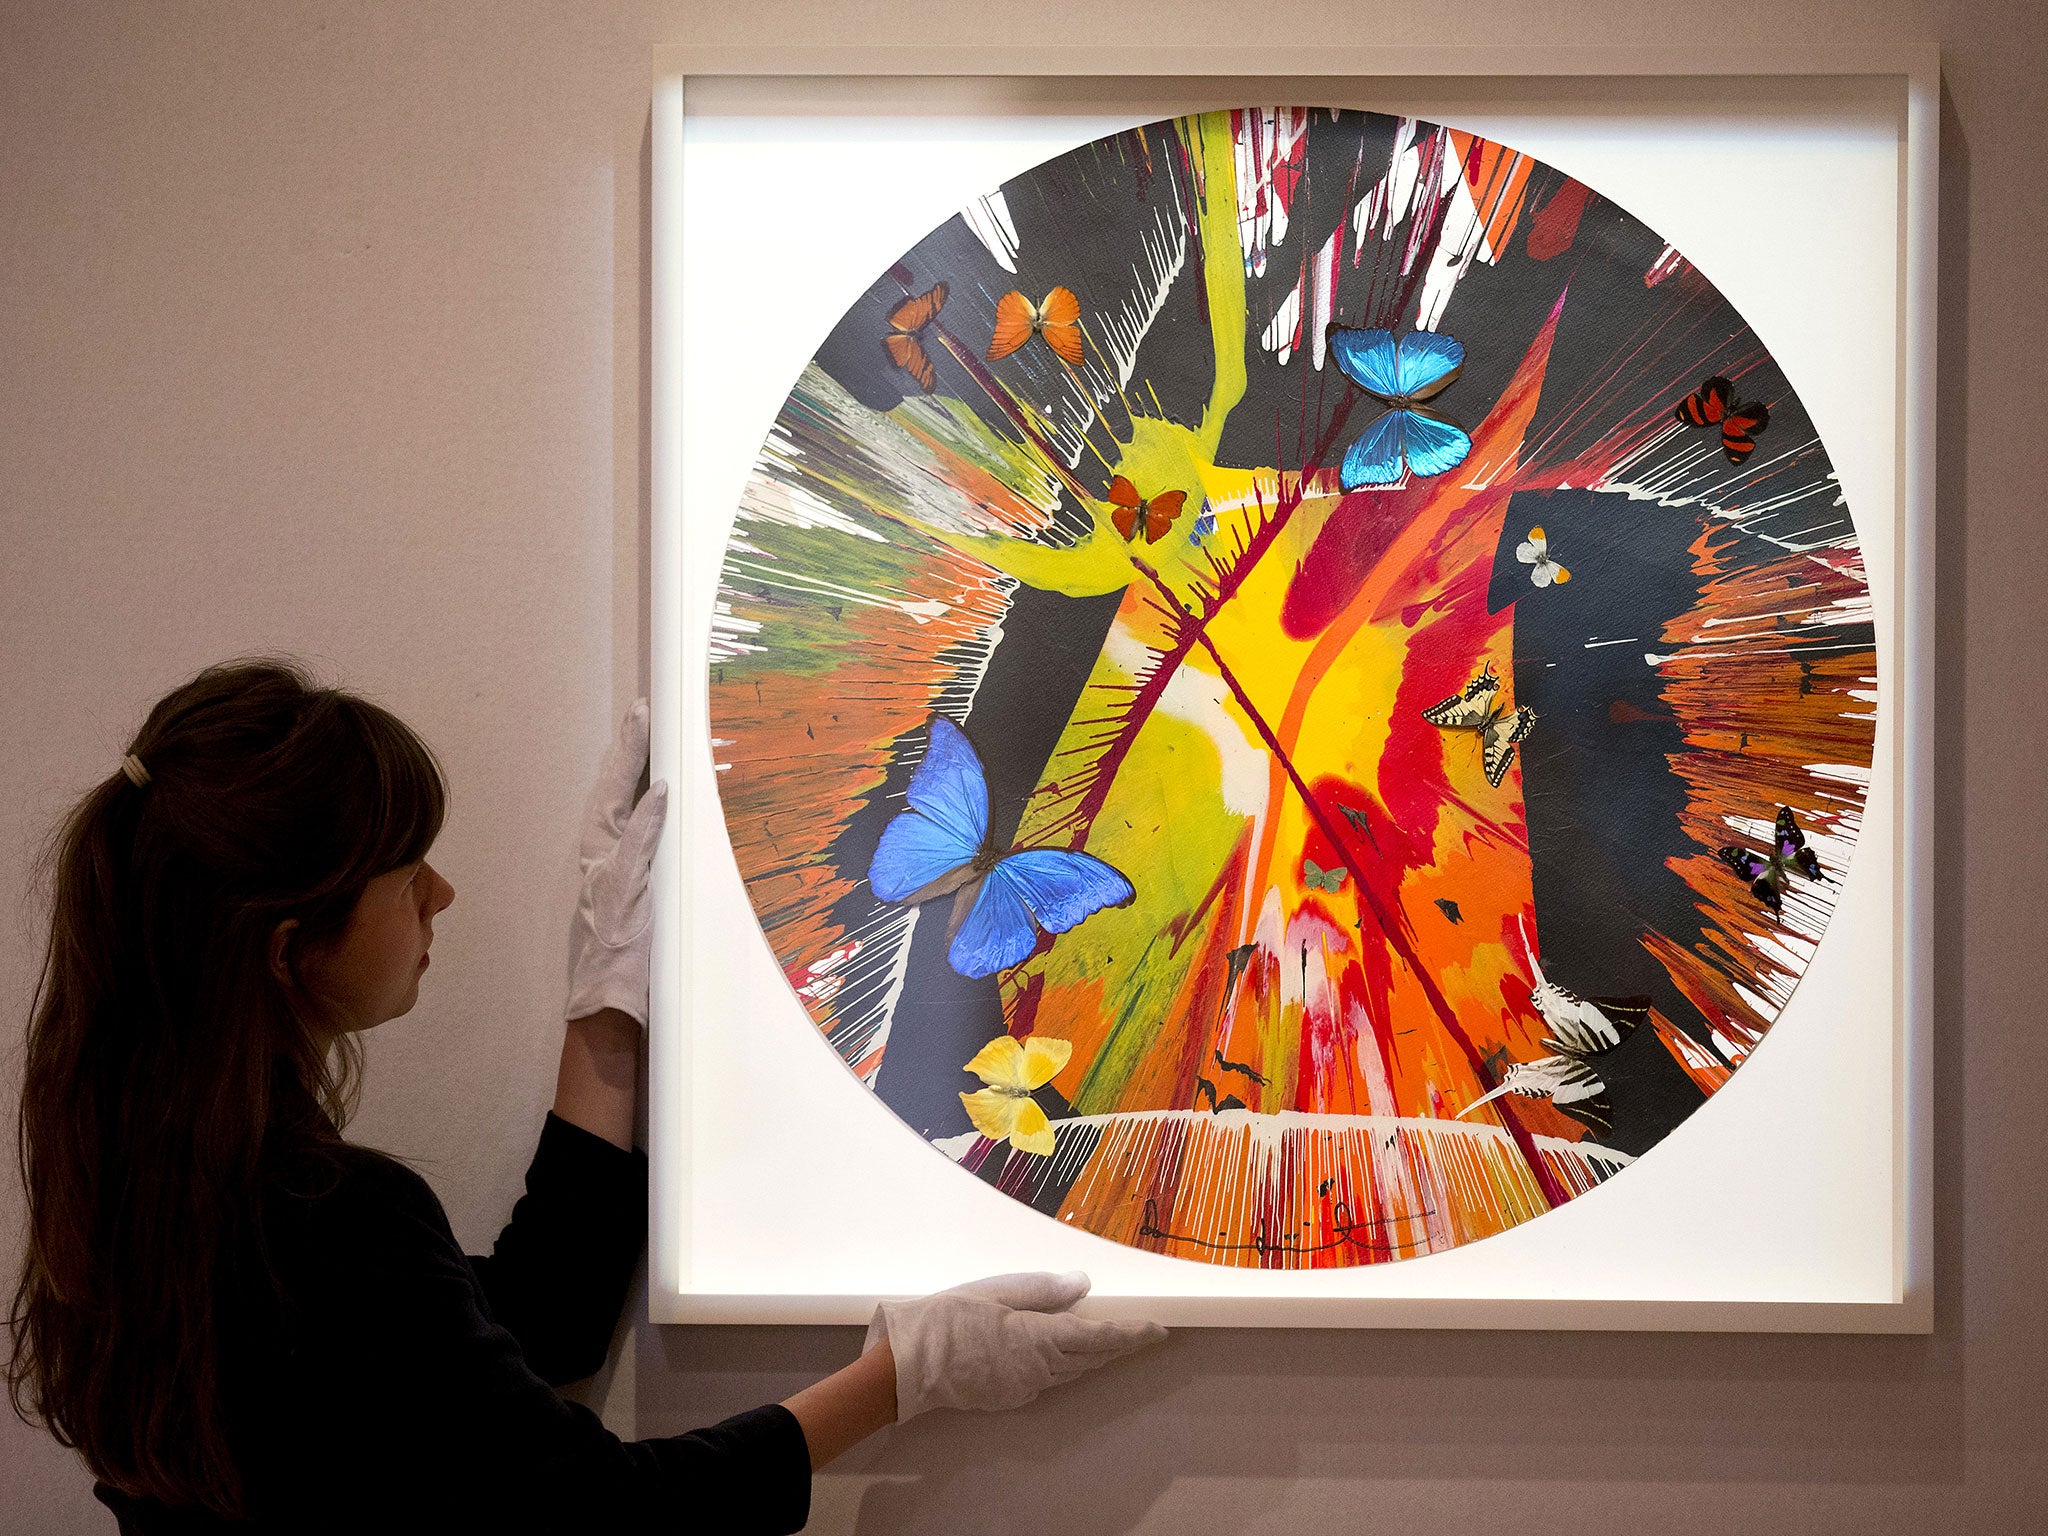 Sutherland mimicked Hirst's iconic round "spin" paintings, such as the one pictured here